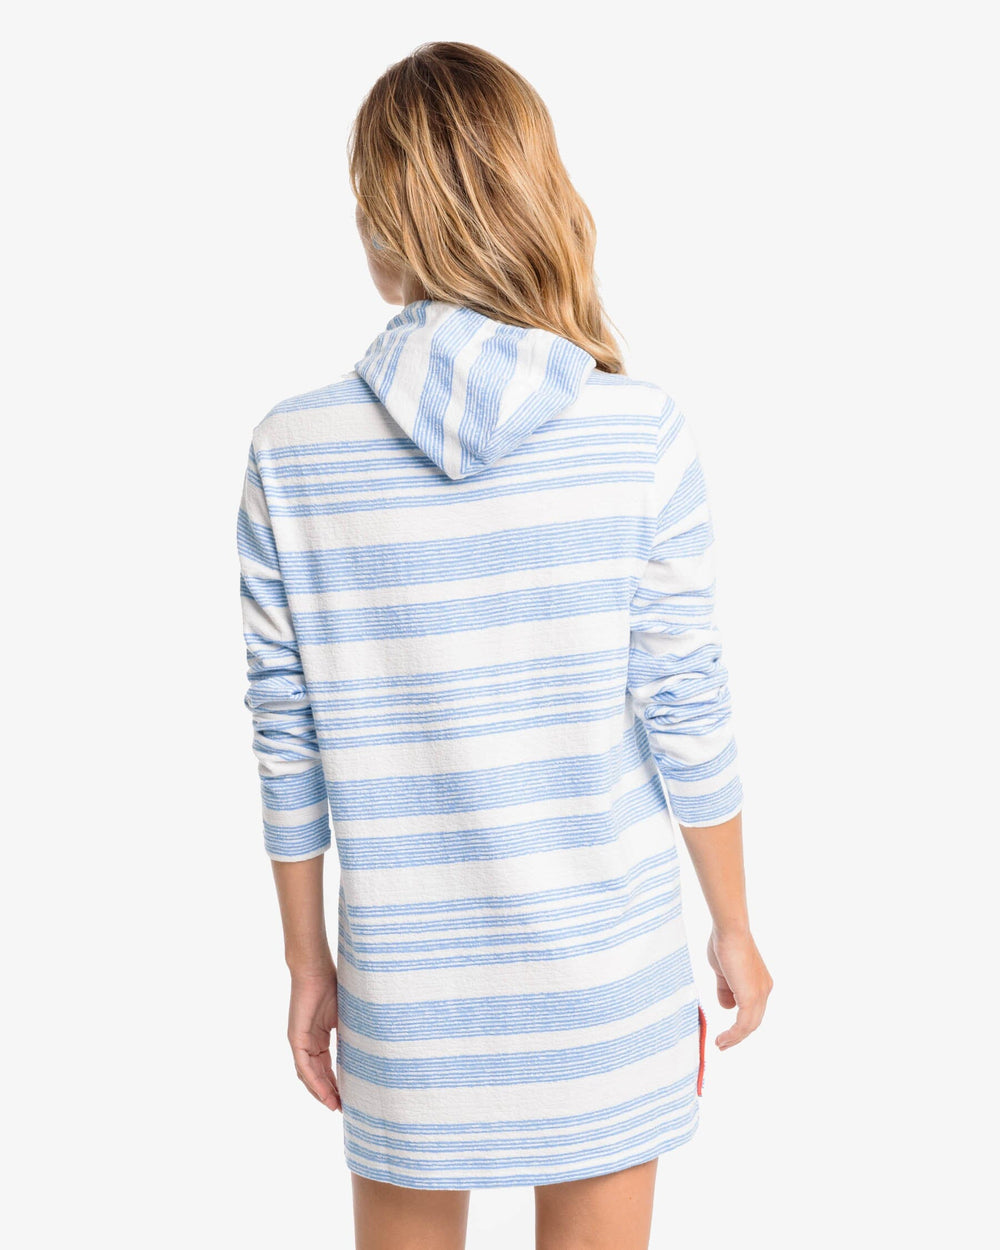 The back view of the Southern Tide Kayla Striped Beach Tunic by Southern Tide - Boat Blue